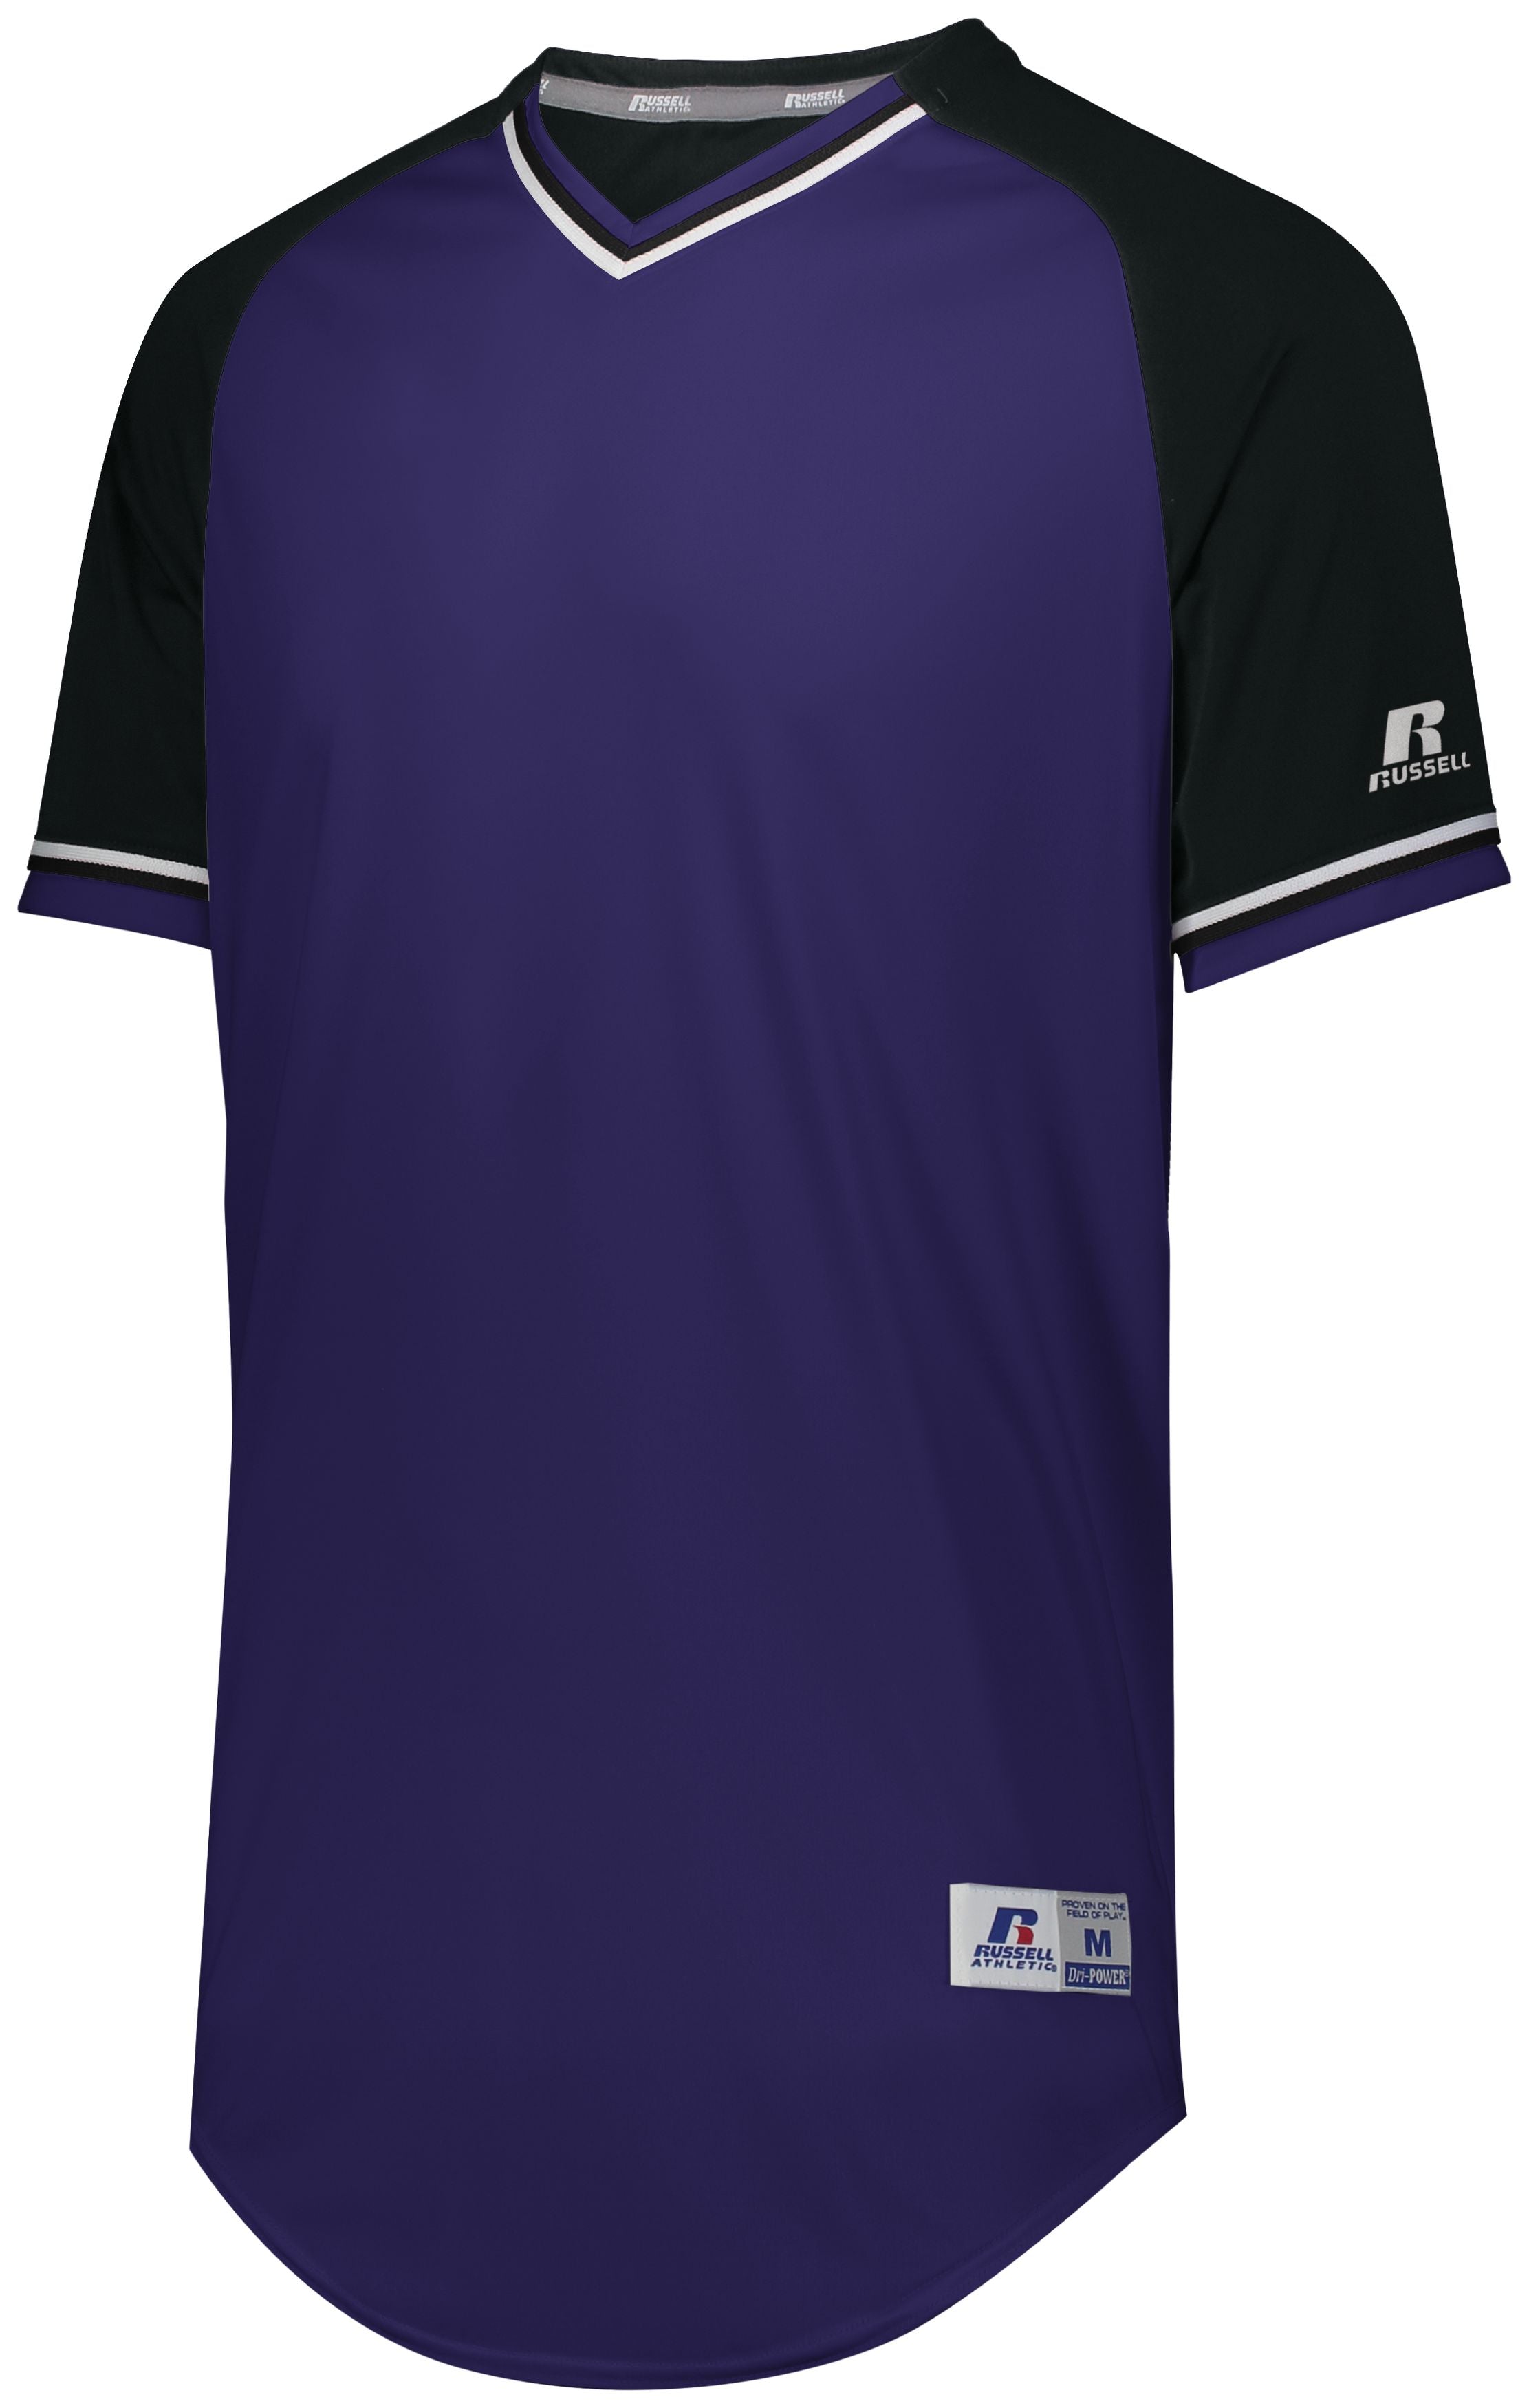 Russell Athletic Youth Classic V-Neck Jersey in Purple/Black/White  -Part of the Youth, Youth-Jersey, Baseball, Russell-Athletic-Products, Shirts, All-Sports, All-Sports-1 product lines at KanaleyCreations.com